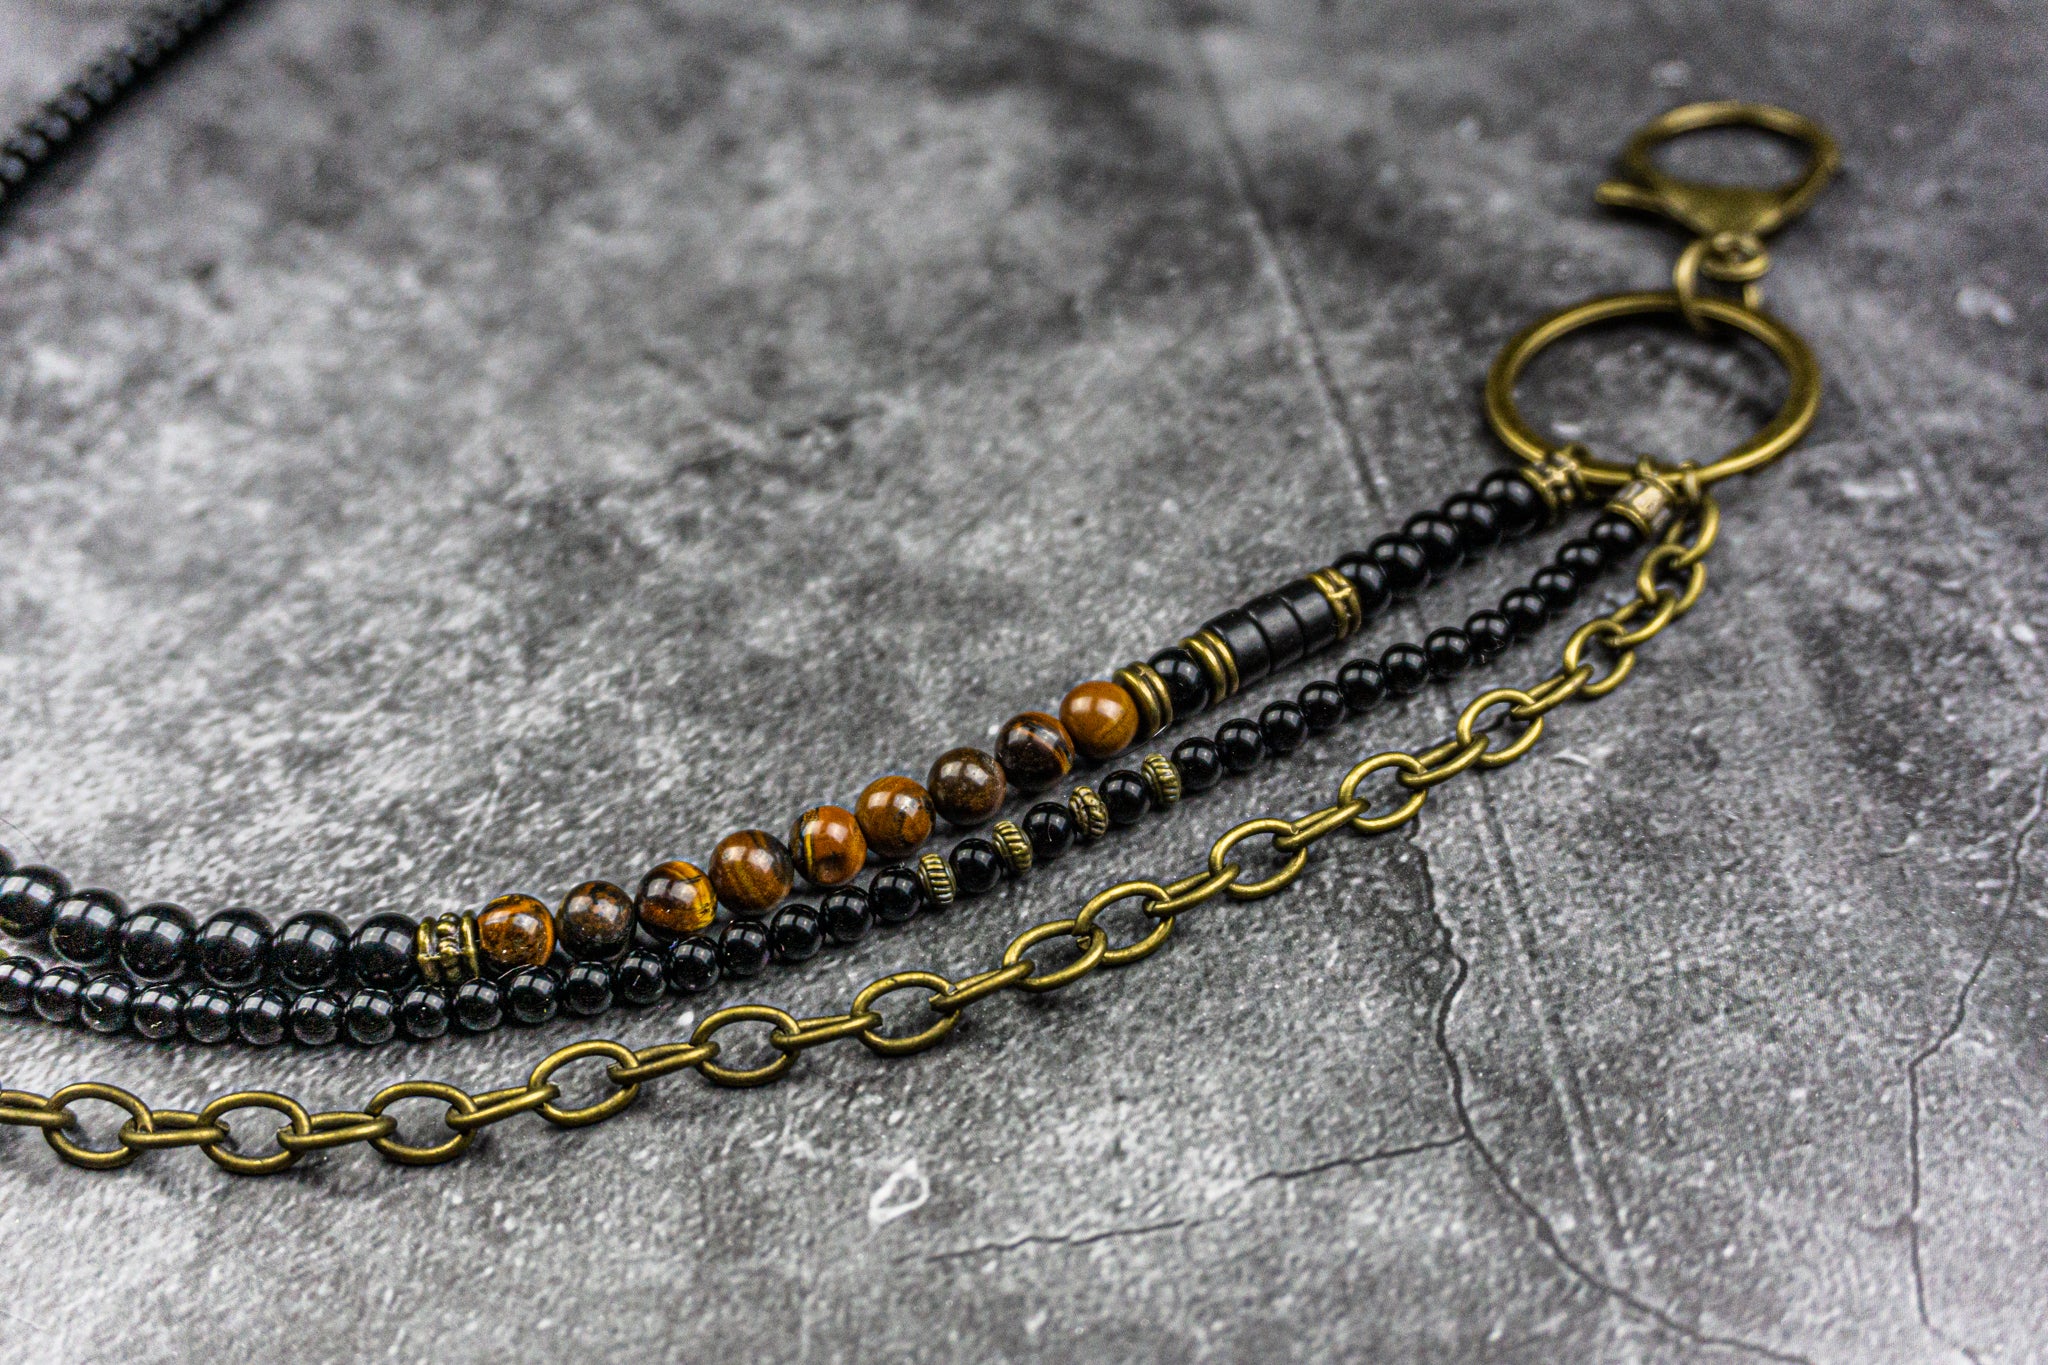 pants key chain multistrand made of onyx and tiger eye beads and a bronze chain